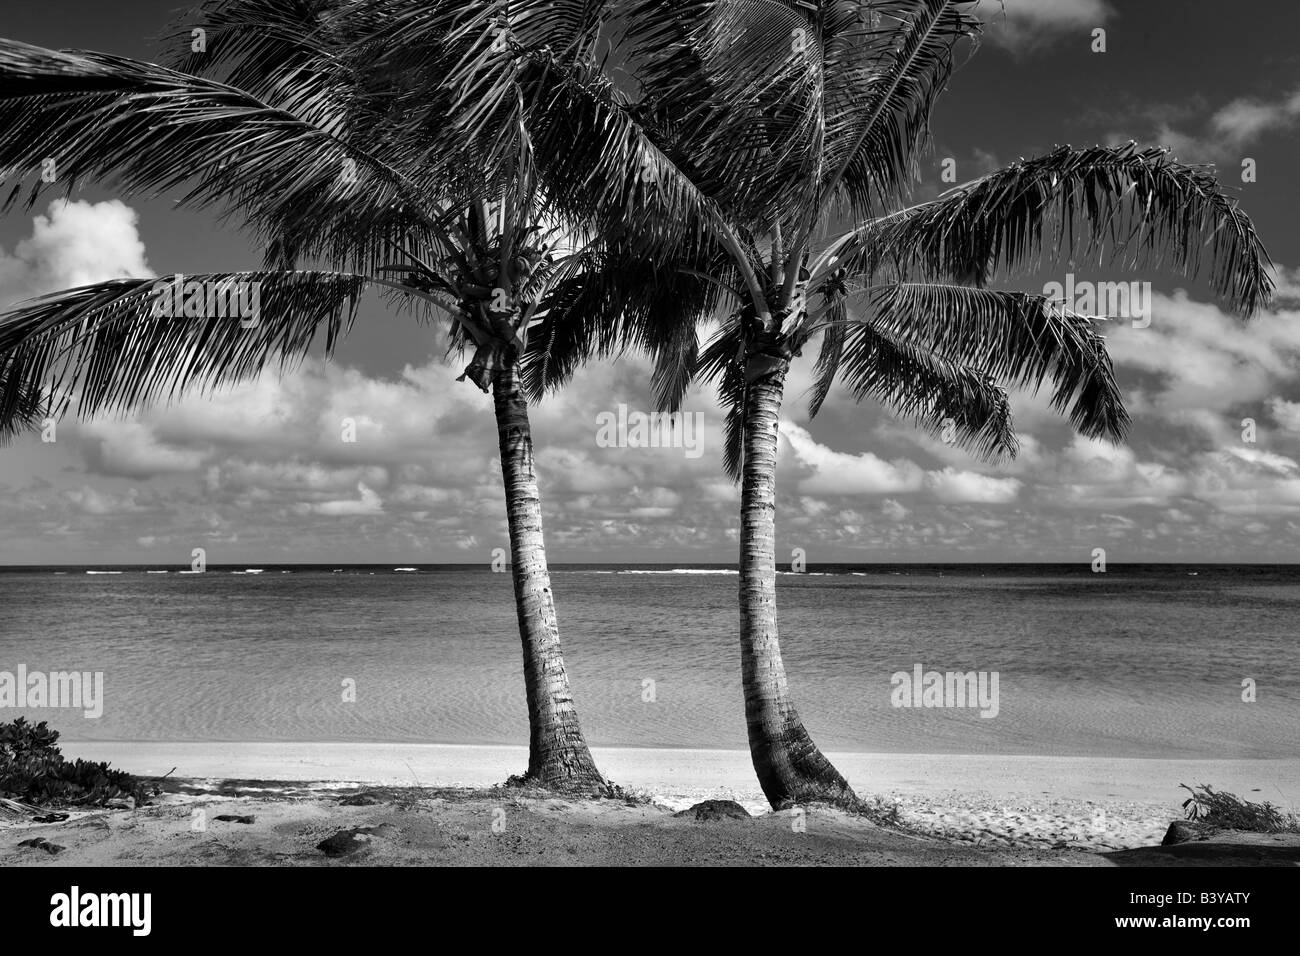 Hawaii beaches palm trees Black and White Stock Photos & Images - Alamy